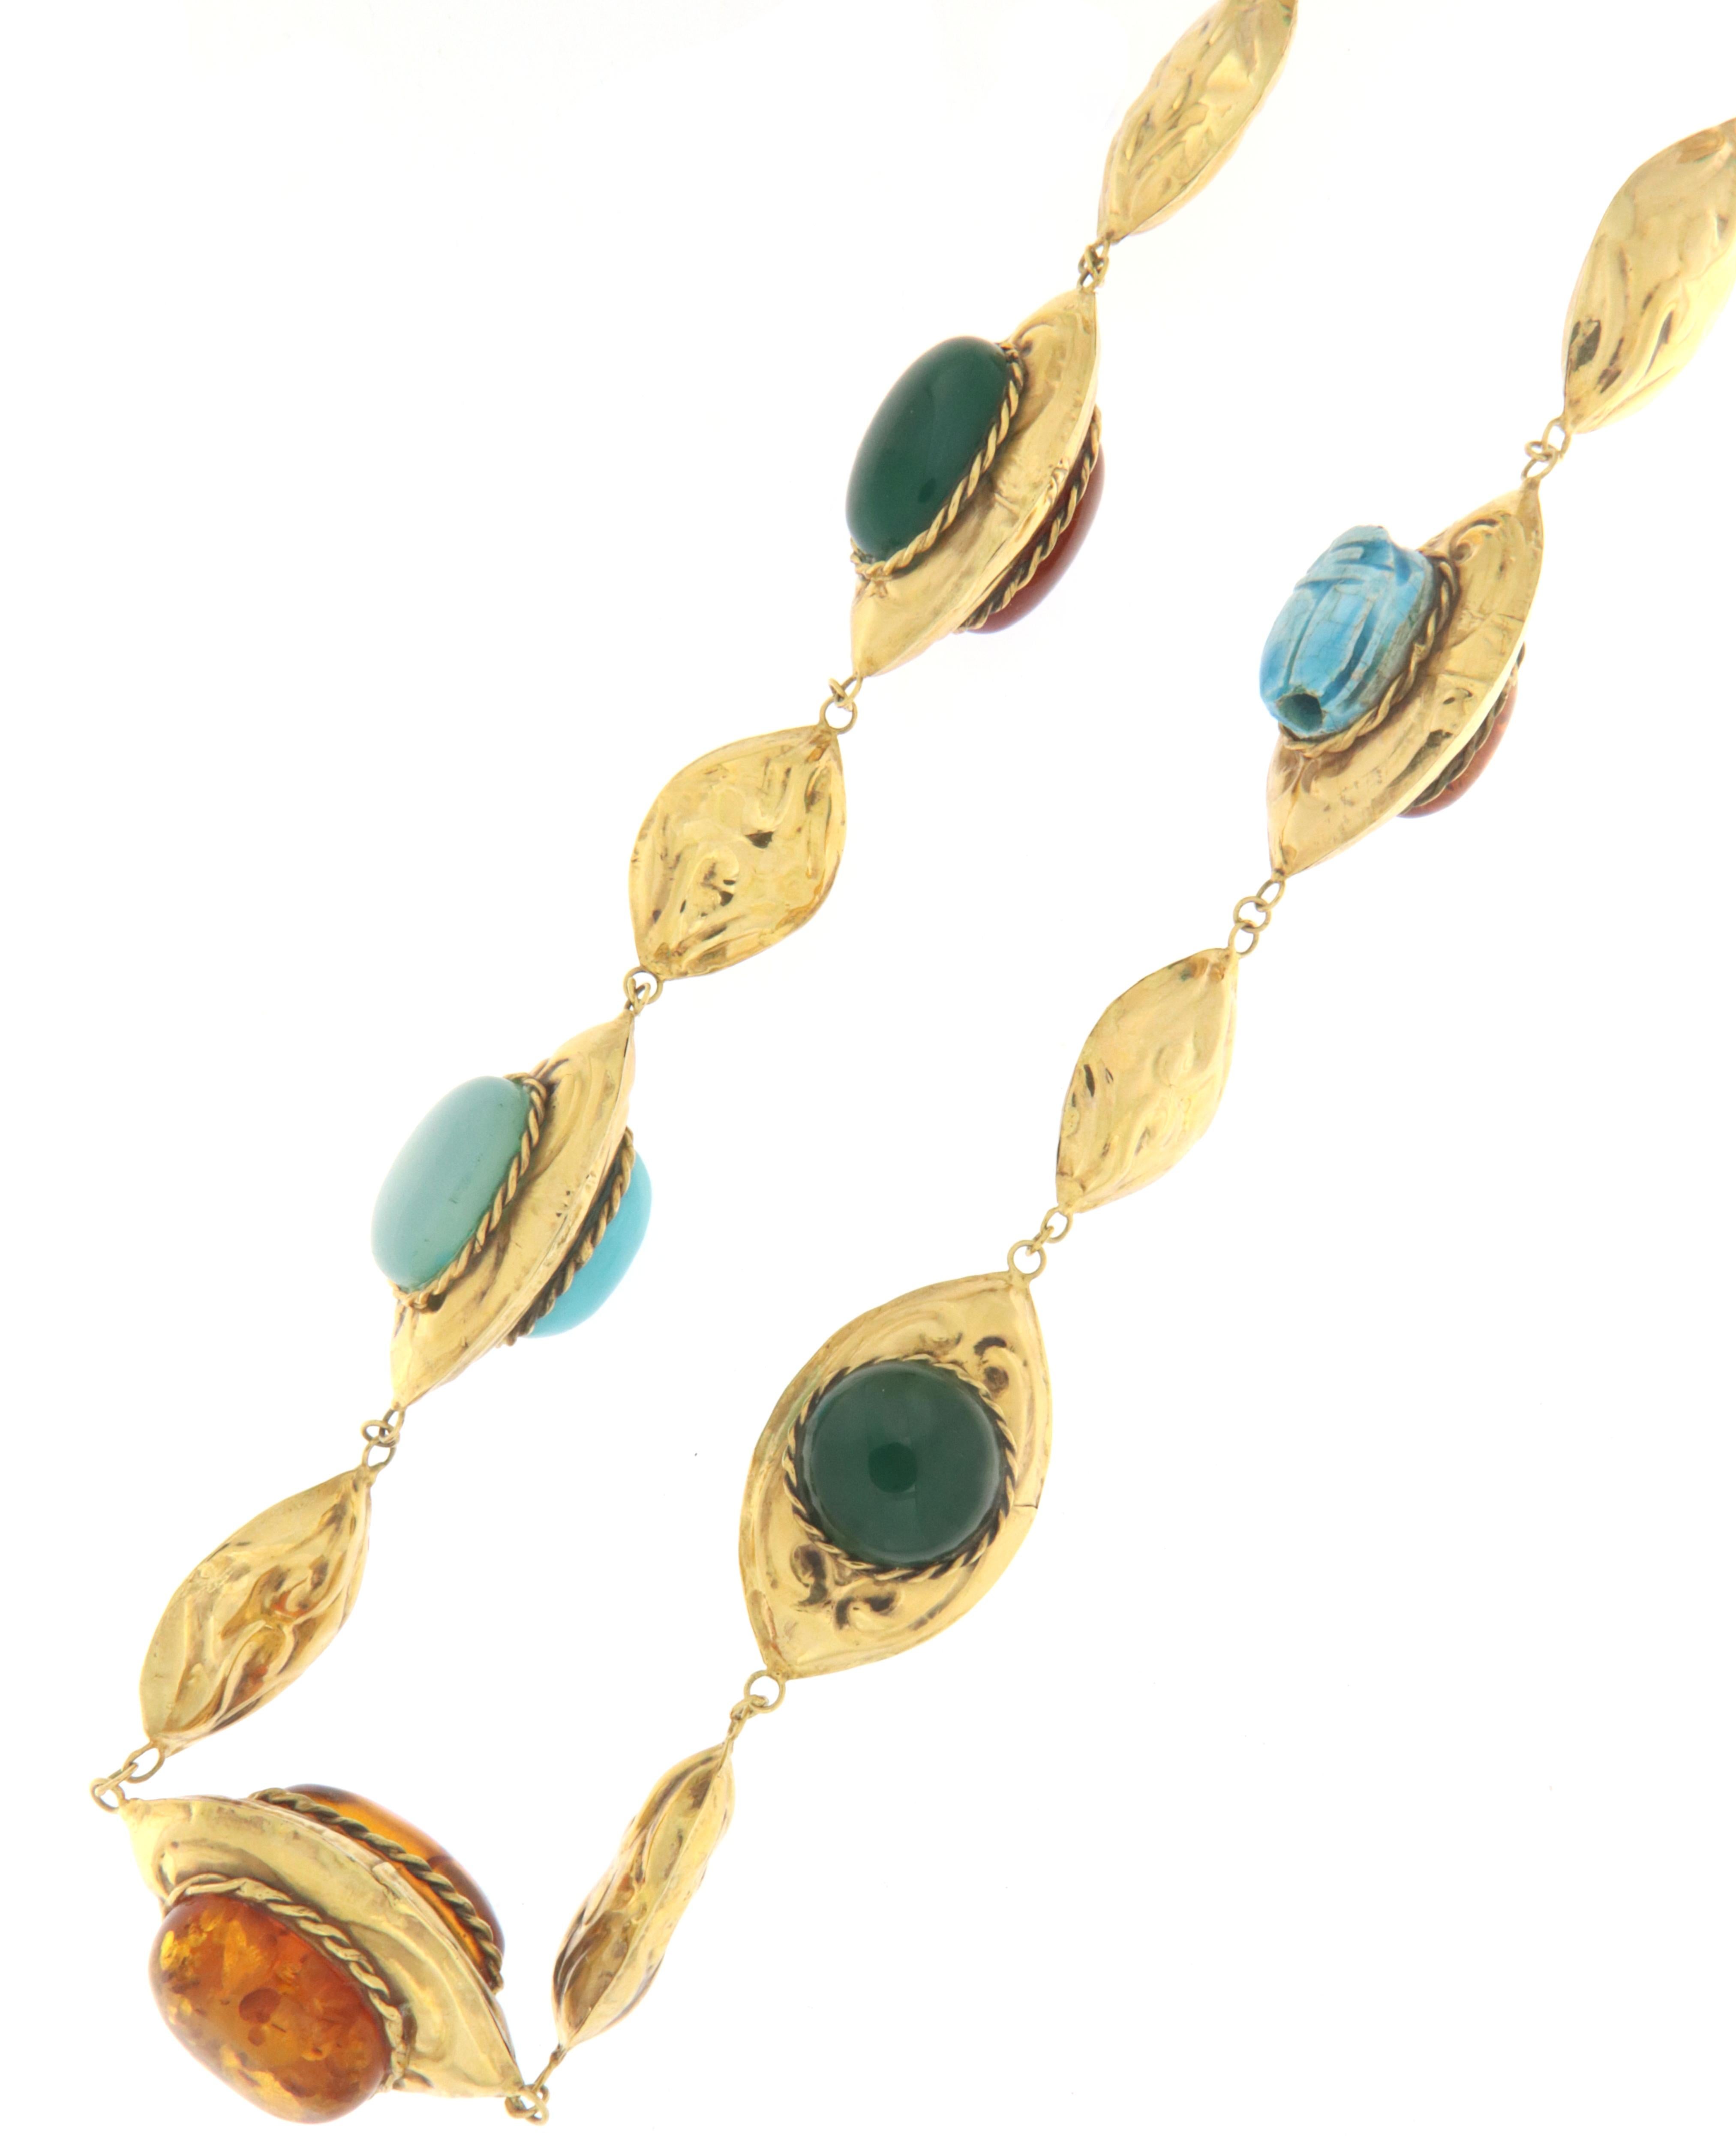 Fantastic antique necklace in 9 karat yellow gold handmade in 1900 by ancient Neapolitan jewelers, of Italian manufacture, mounted with beautiful stones in turquoise, green agate, amber, coral and topaz

Necklace total weight 112.60 grams
